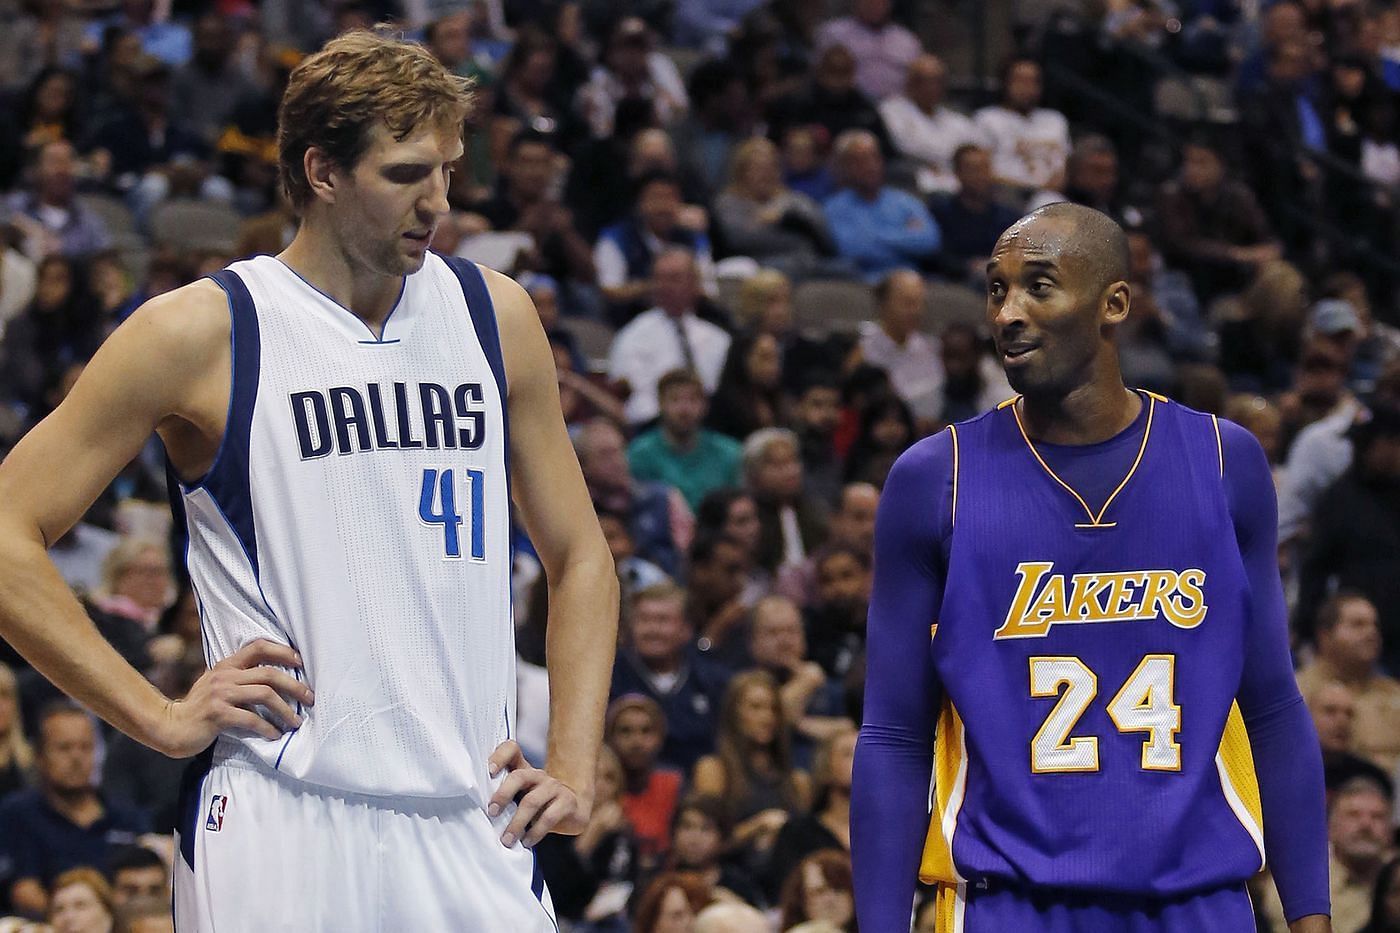 Dallas Mavericks team owner Mark Cuban was convinced his team would have been very good with Kobe Bryant and Dirk Nowitzki. [Photo: Lakers Daily]